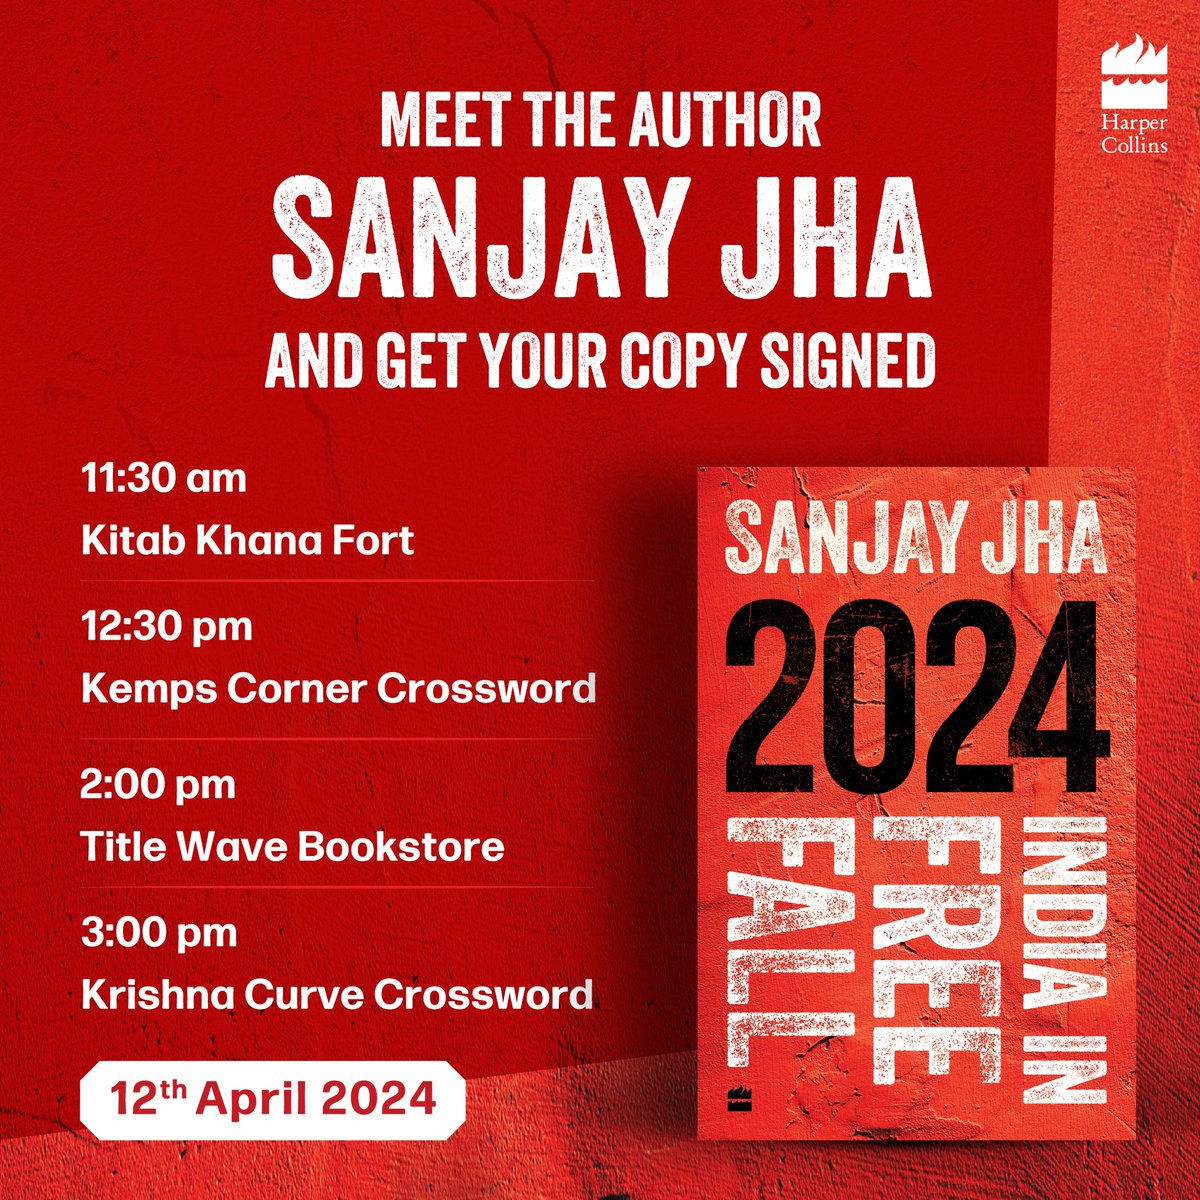 #Mumbai readers, get your signed copy of @JhaSanjay’s fascinating book 2024 India in Free Fall from a local bookstore near you! @KitabKhanaBooks @crossword_book @titlewavesMUM